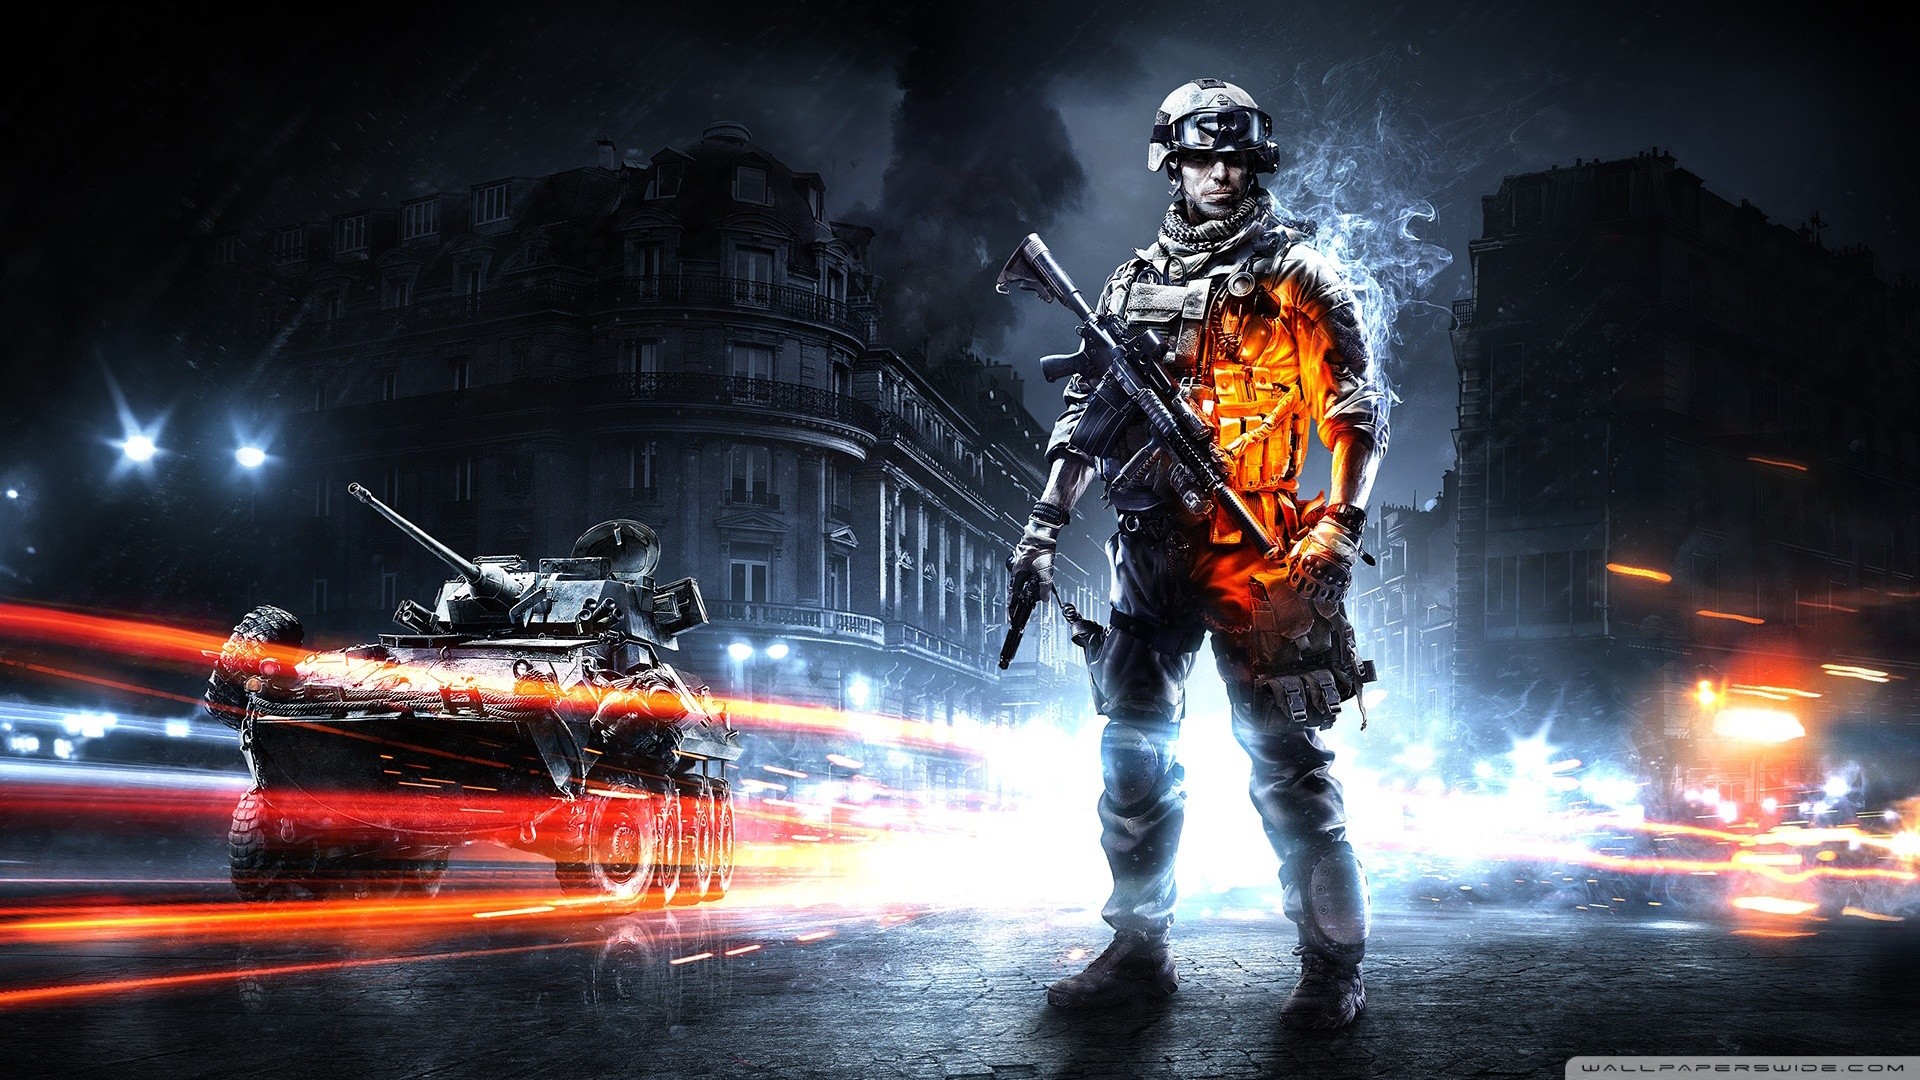 battlefield 3 apk download for android